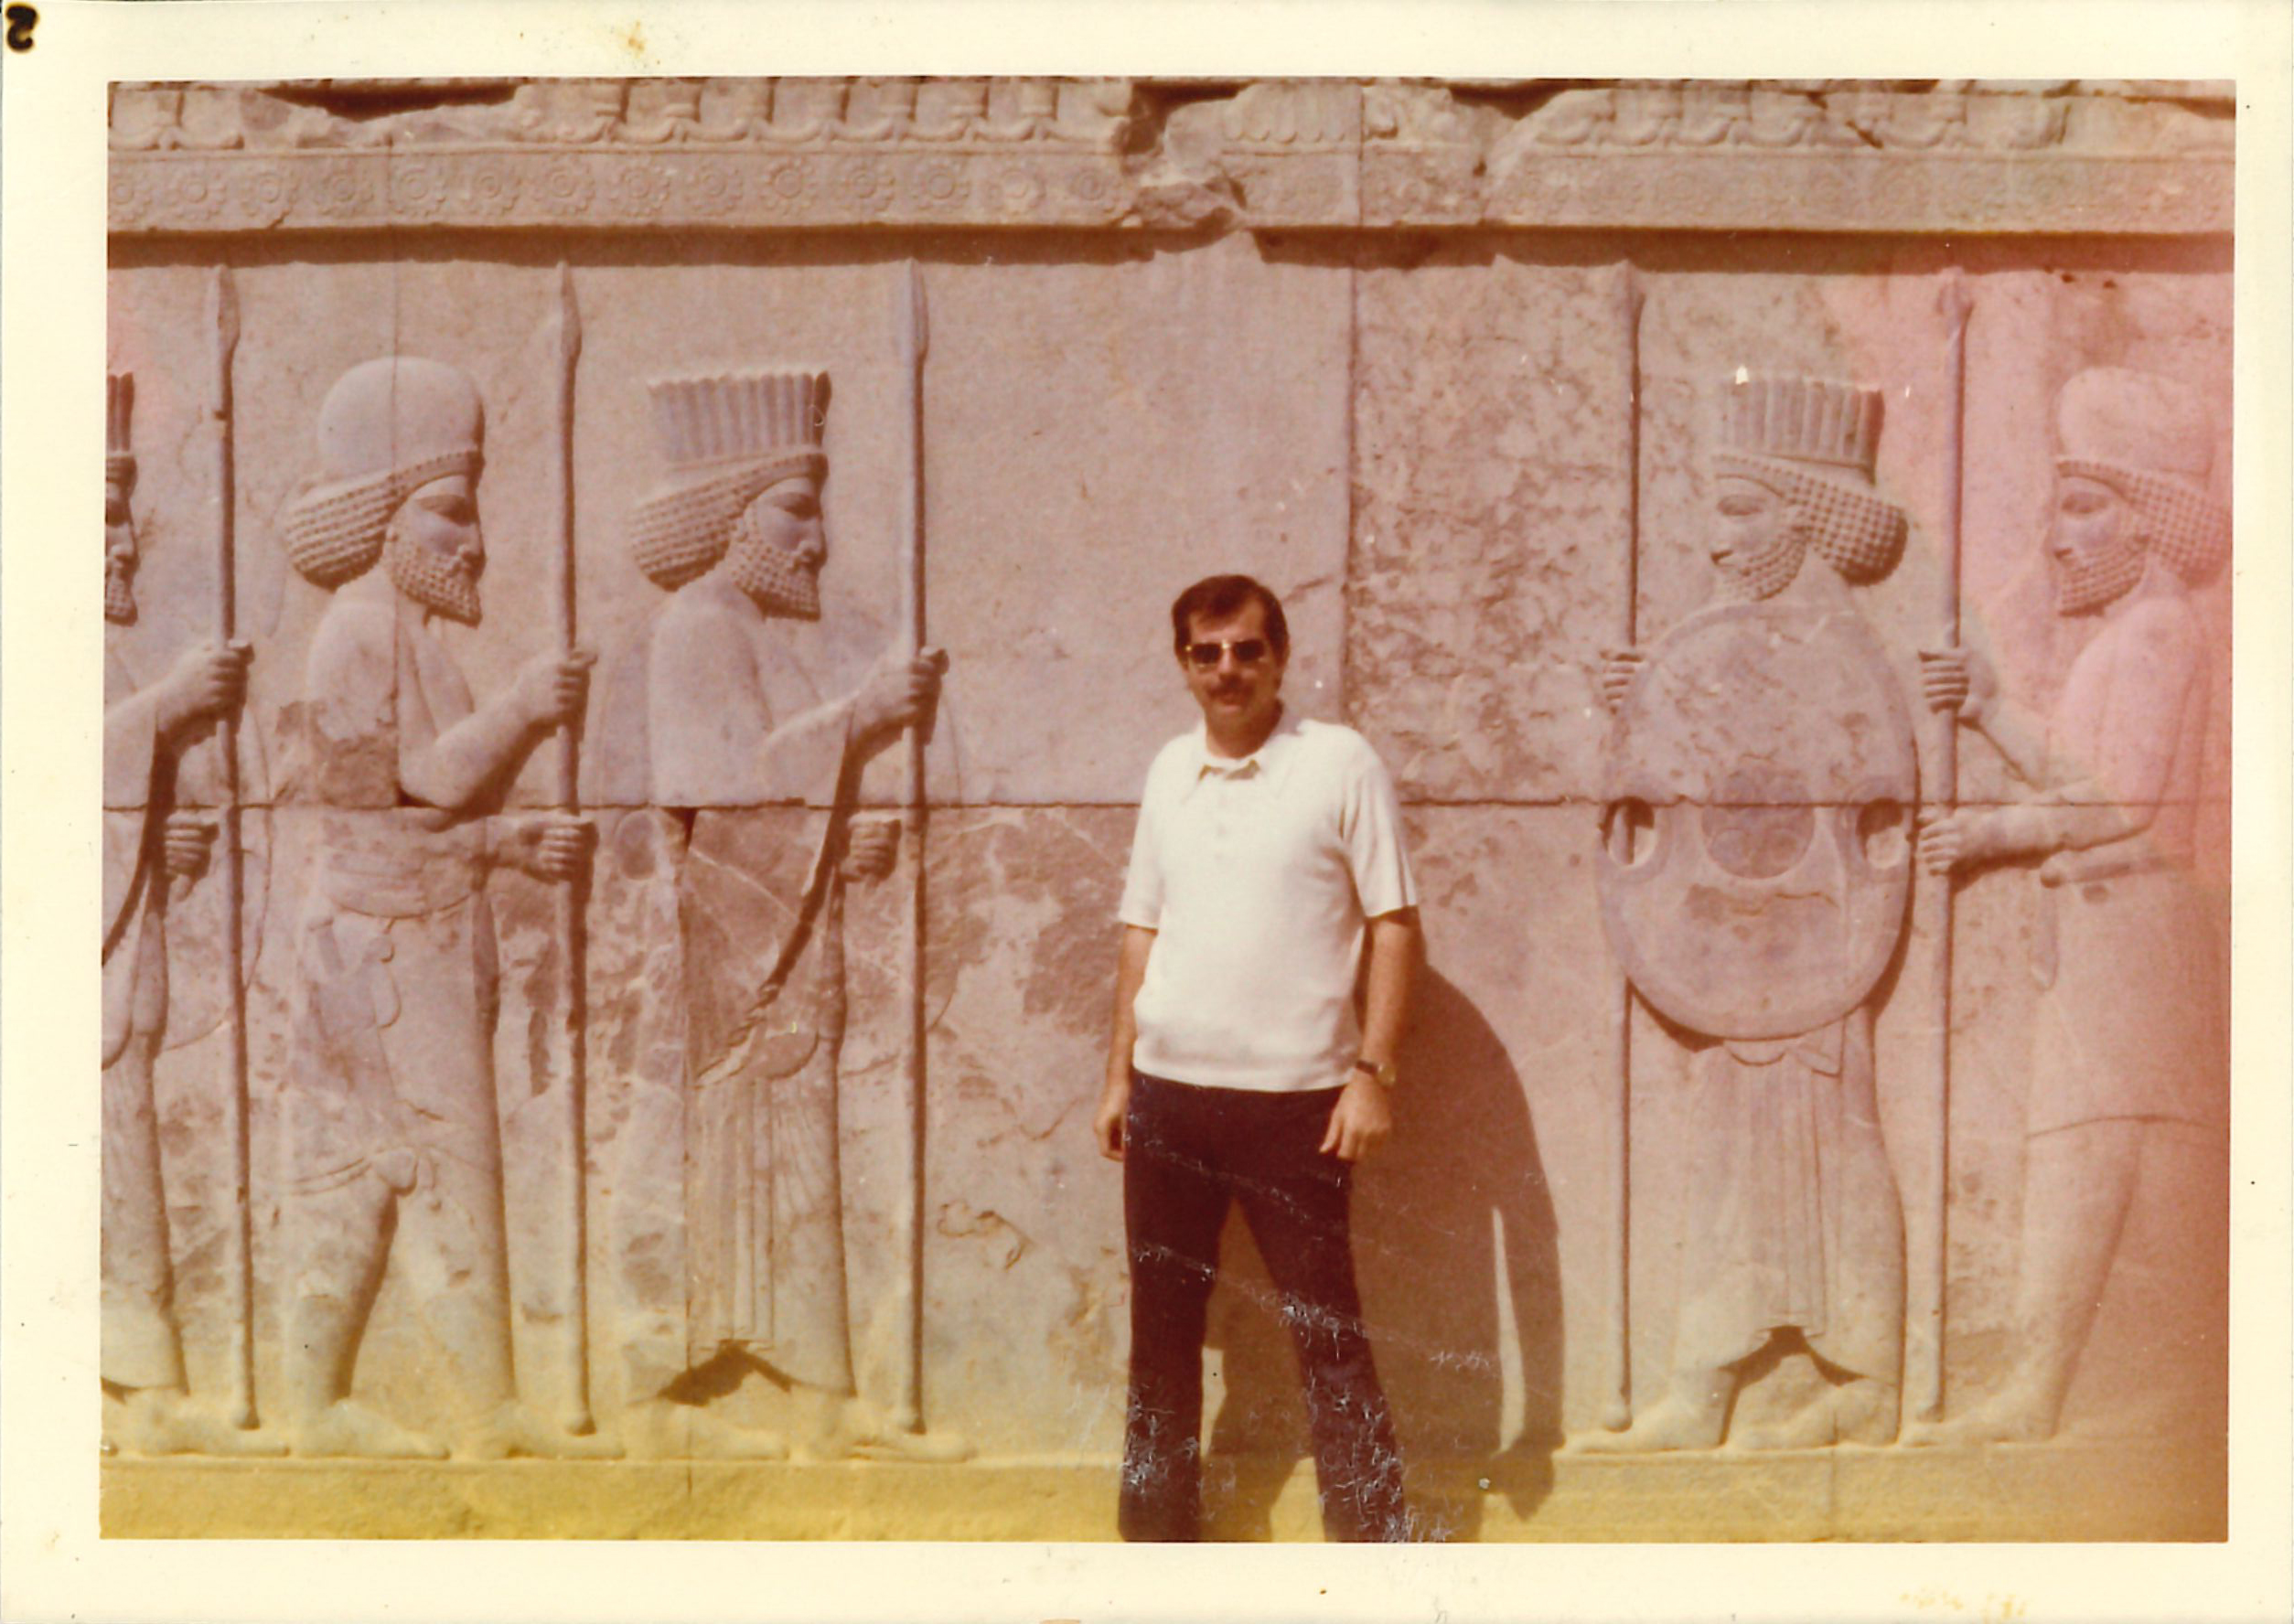 Orr on a visit to Persepolis in Iran.